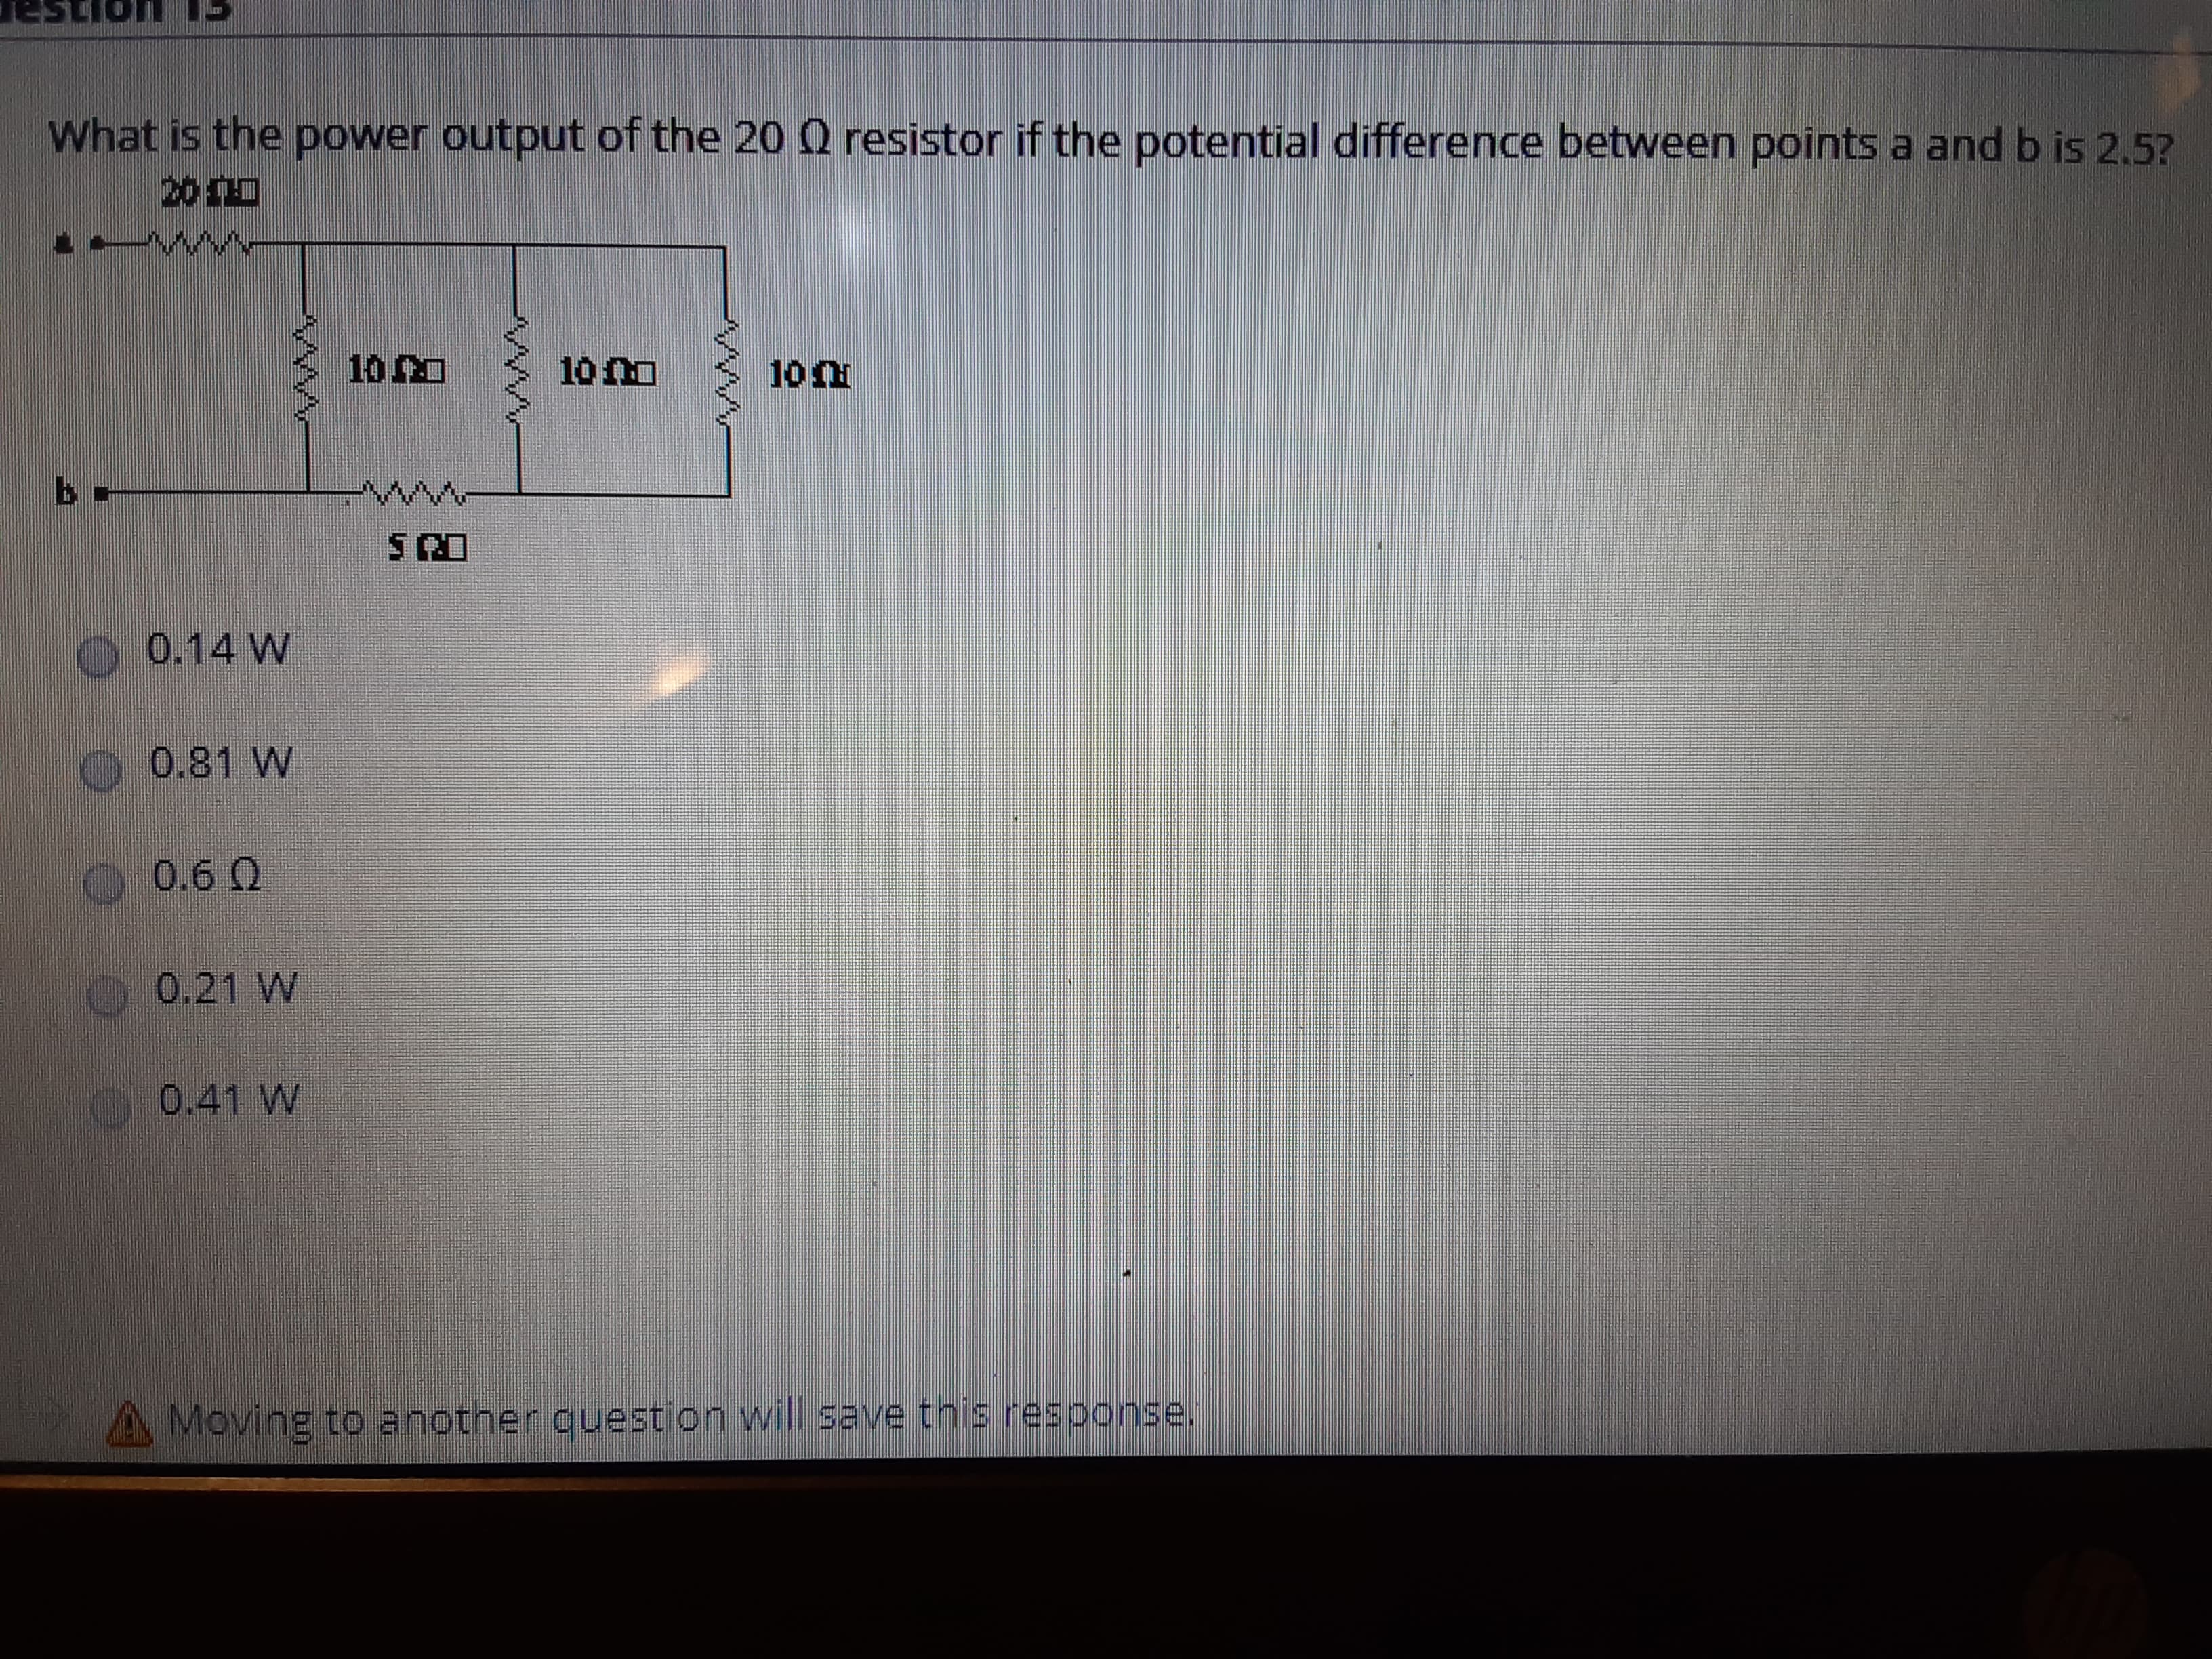 TOnsa
What is the power output of the 20 0 resistor if the potential difference between points a and b is 2.5?
200
10
10 n0
0.14 W
0,81 W
0.6 0
0 0.21 W
0.41 W
A Moving to another question will save this response.
